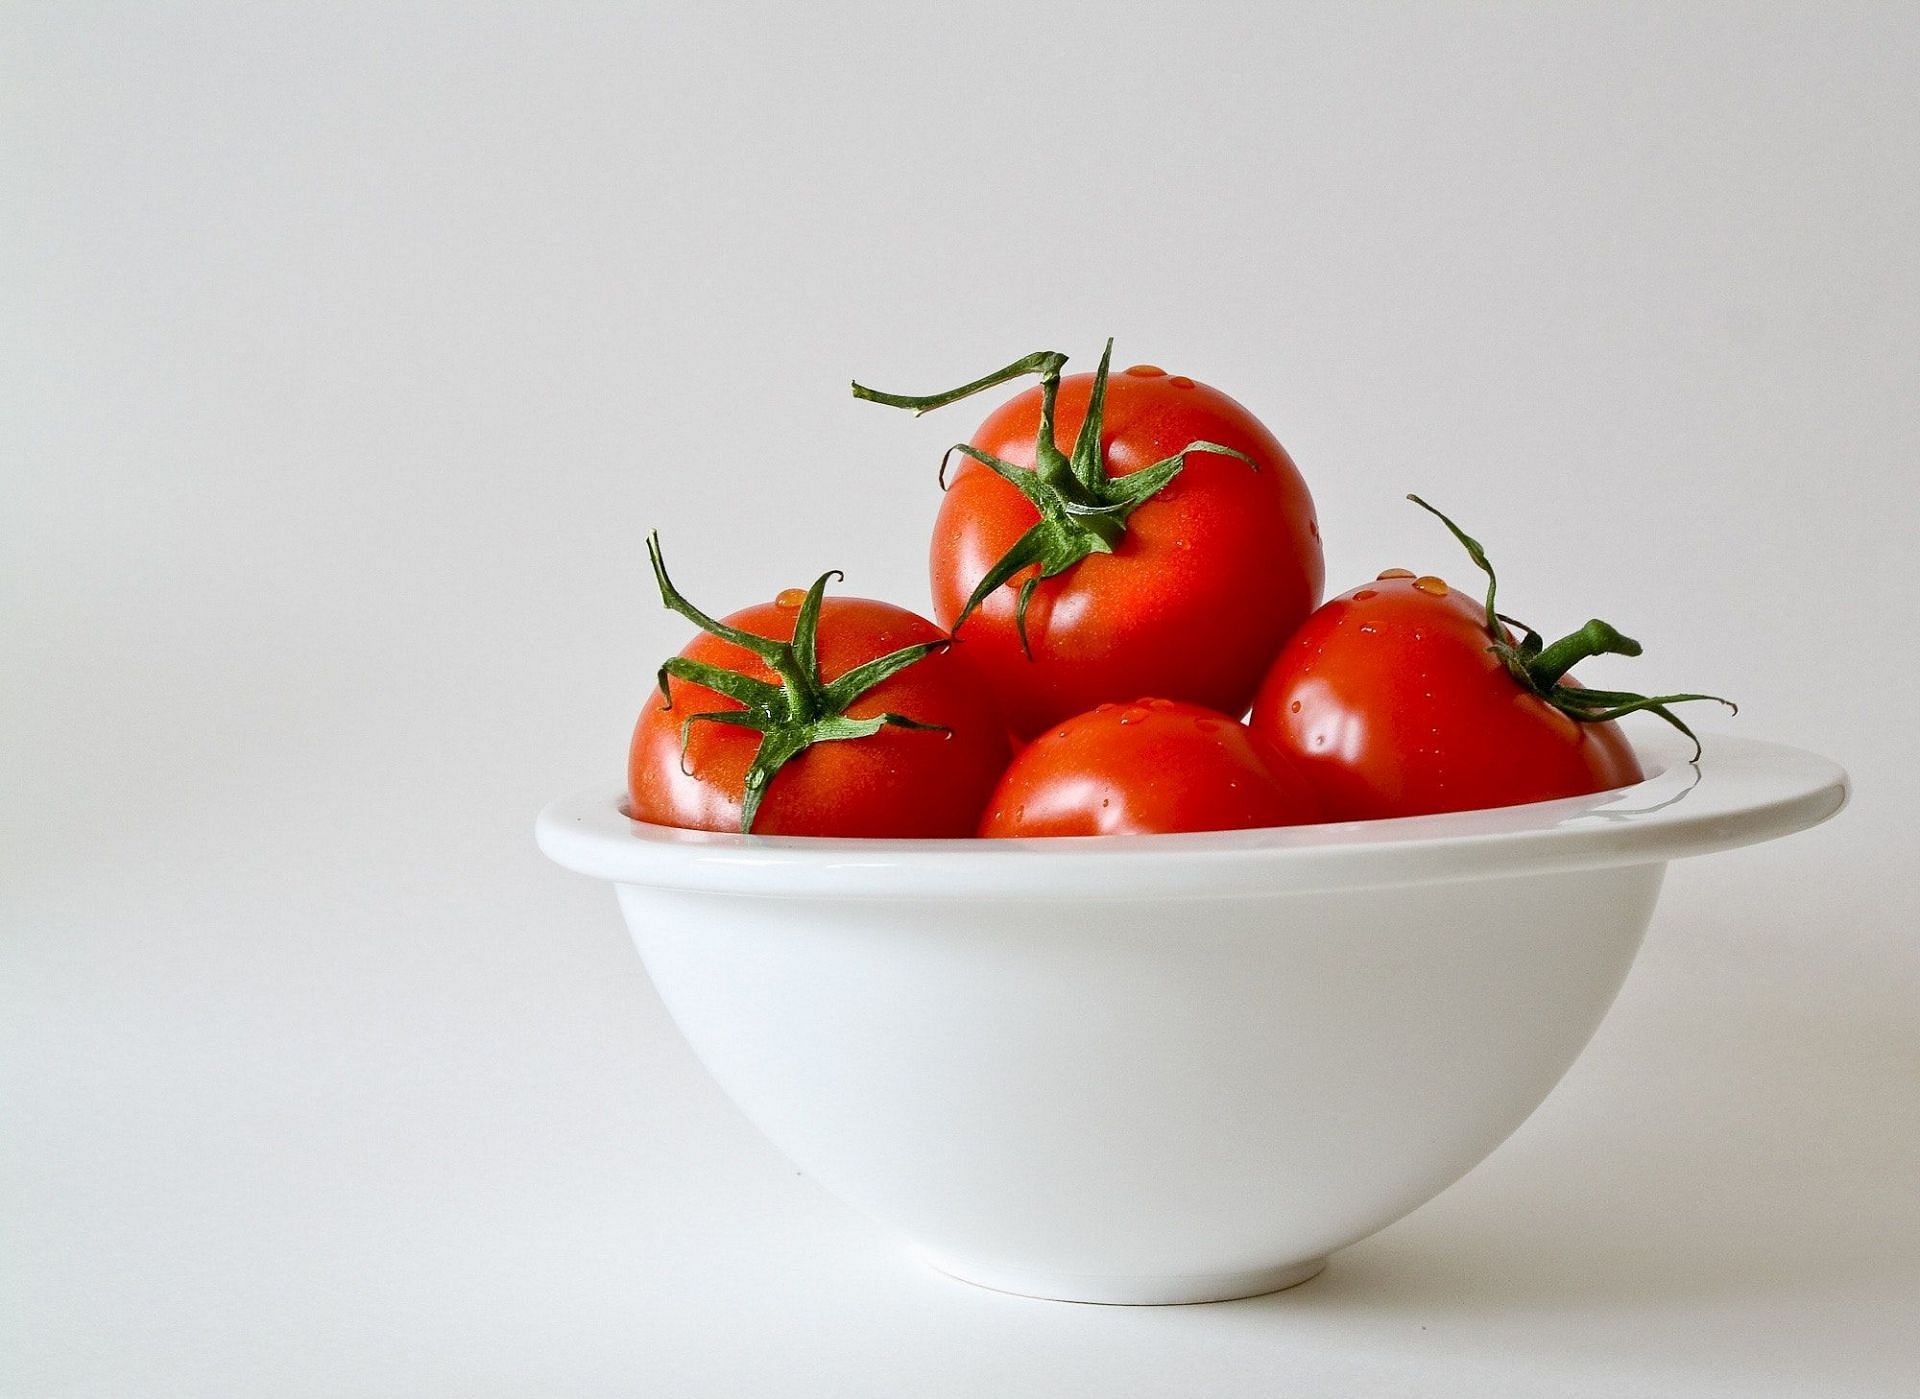 Using Tomatoes to avoid water weight (image sourced via Pexels / Photo by PixaBay)